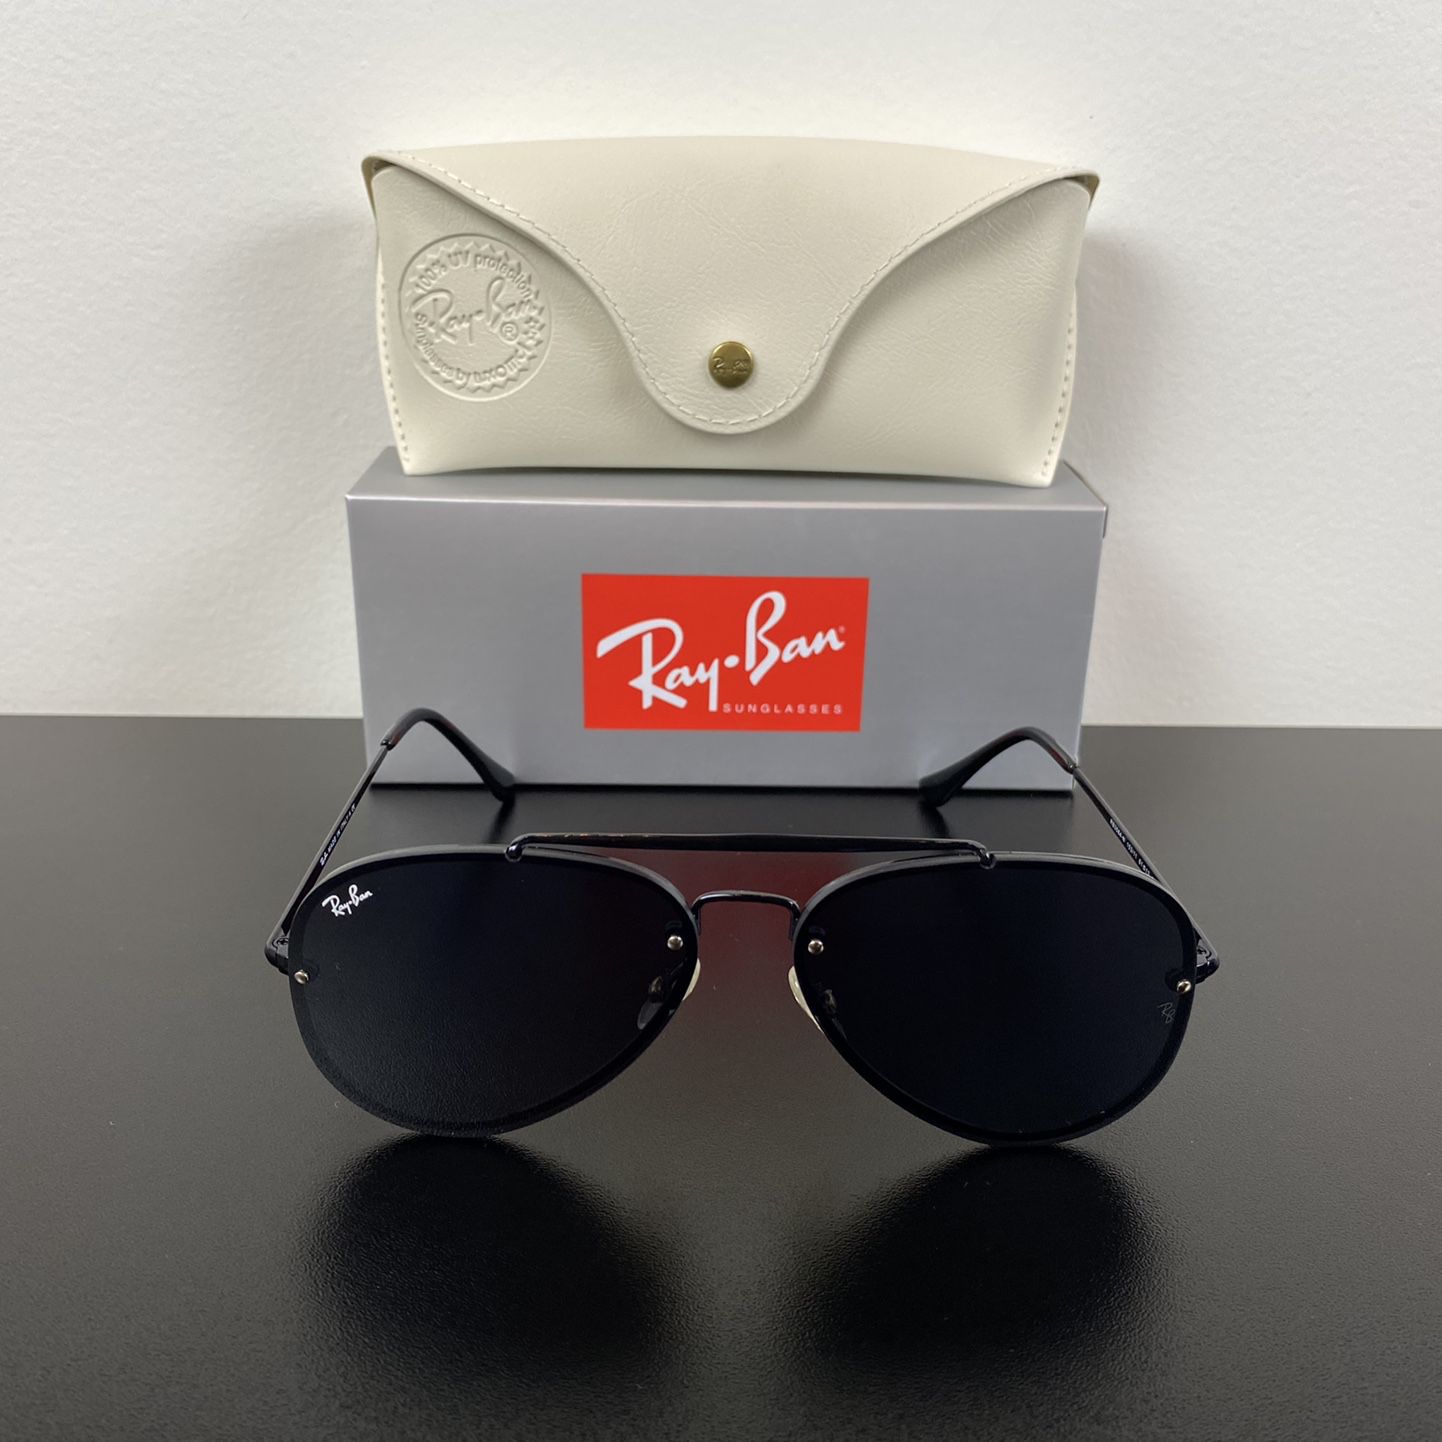 Ray-Ban RB3584 Blaze Aviator Sunglasses Size 61-13-140 All Black With Premium Case